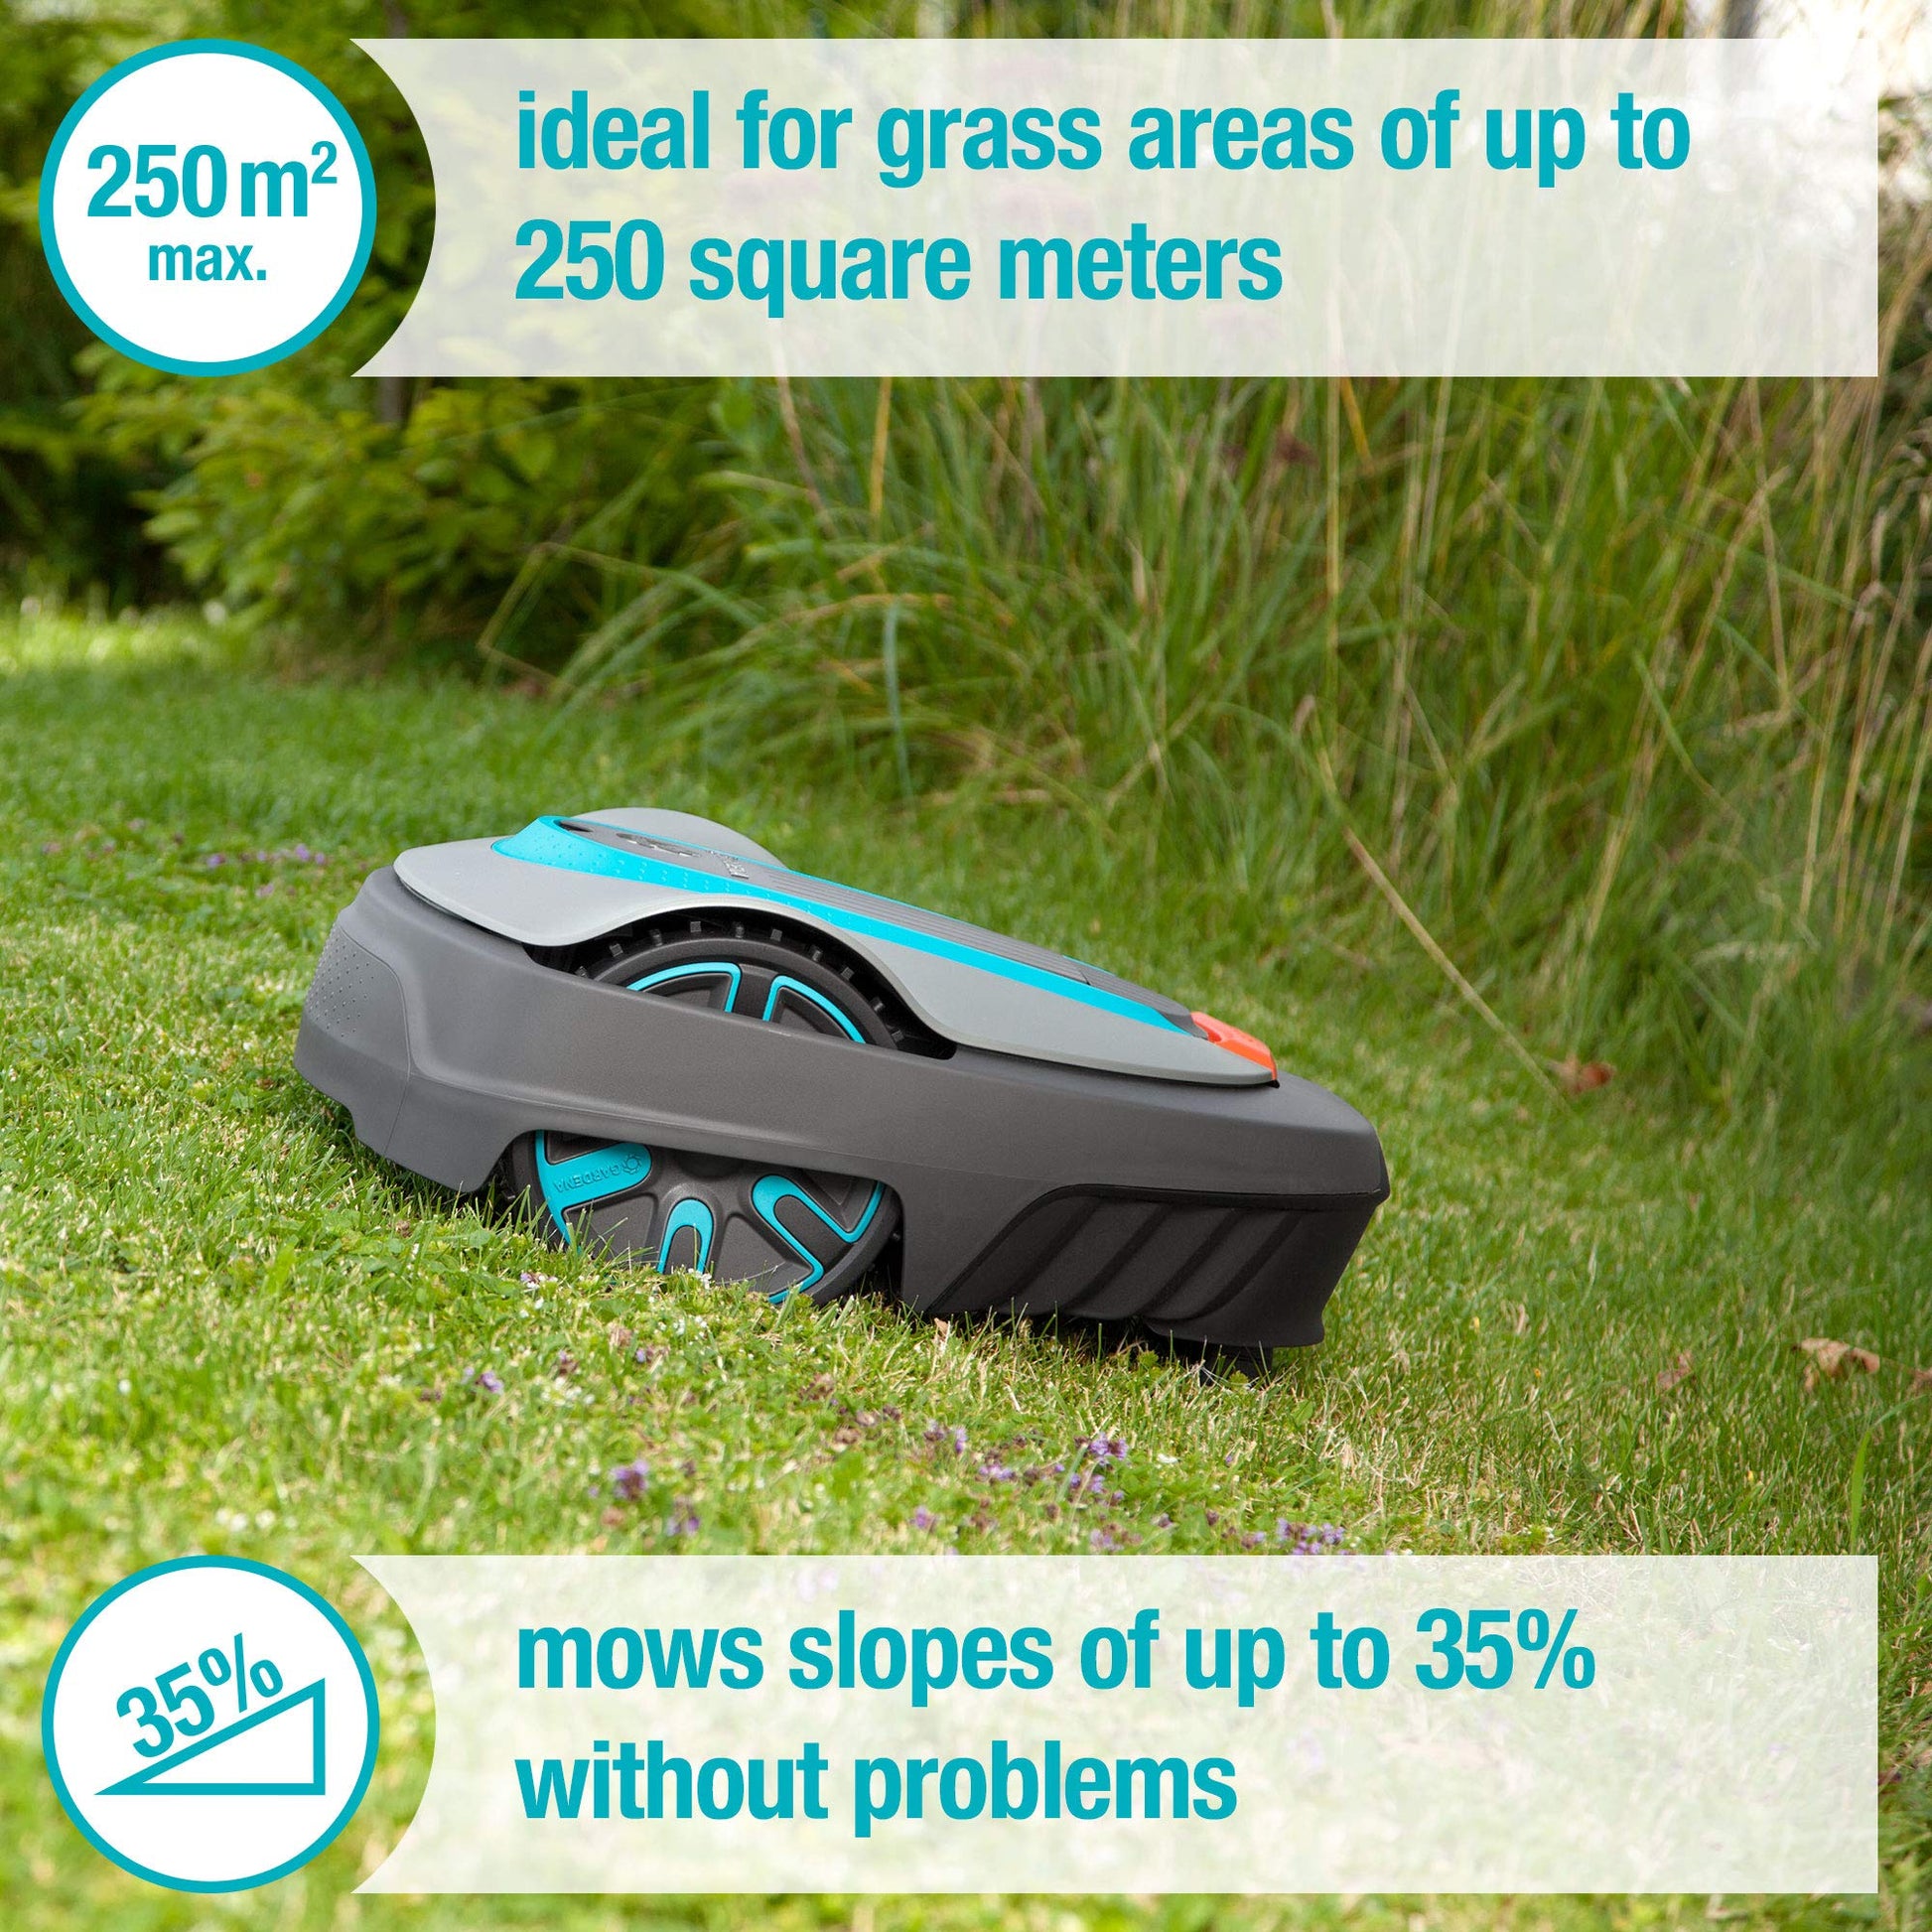 A robotic lawn mover with text stating some features of the robot.